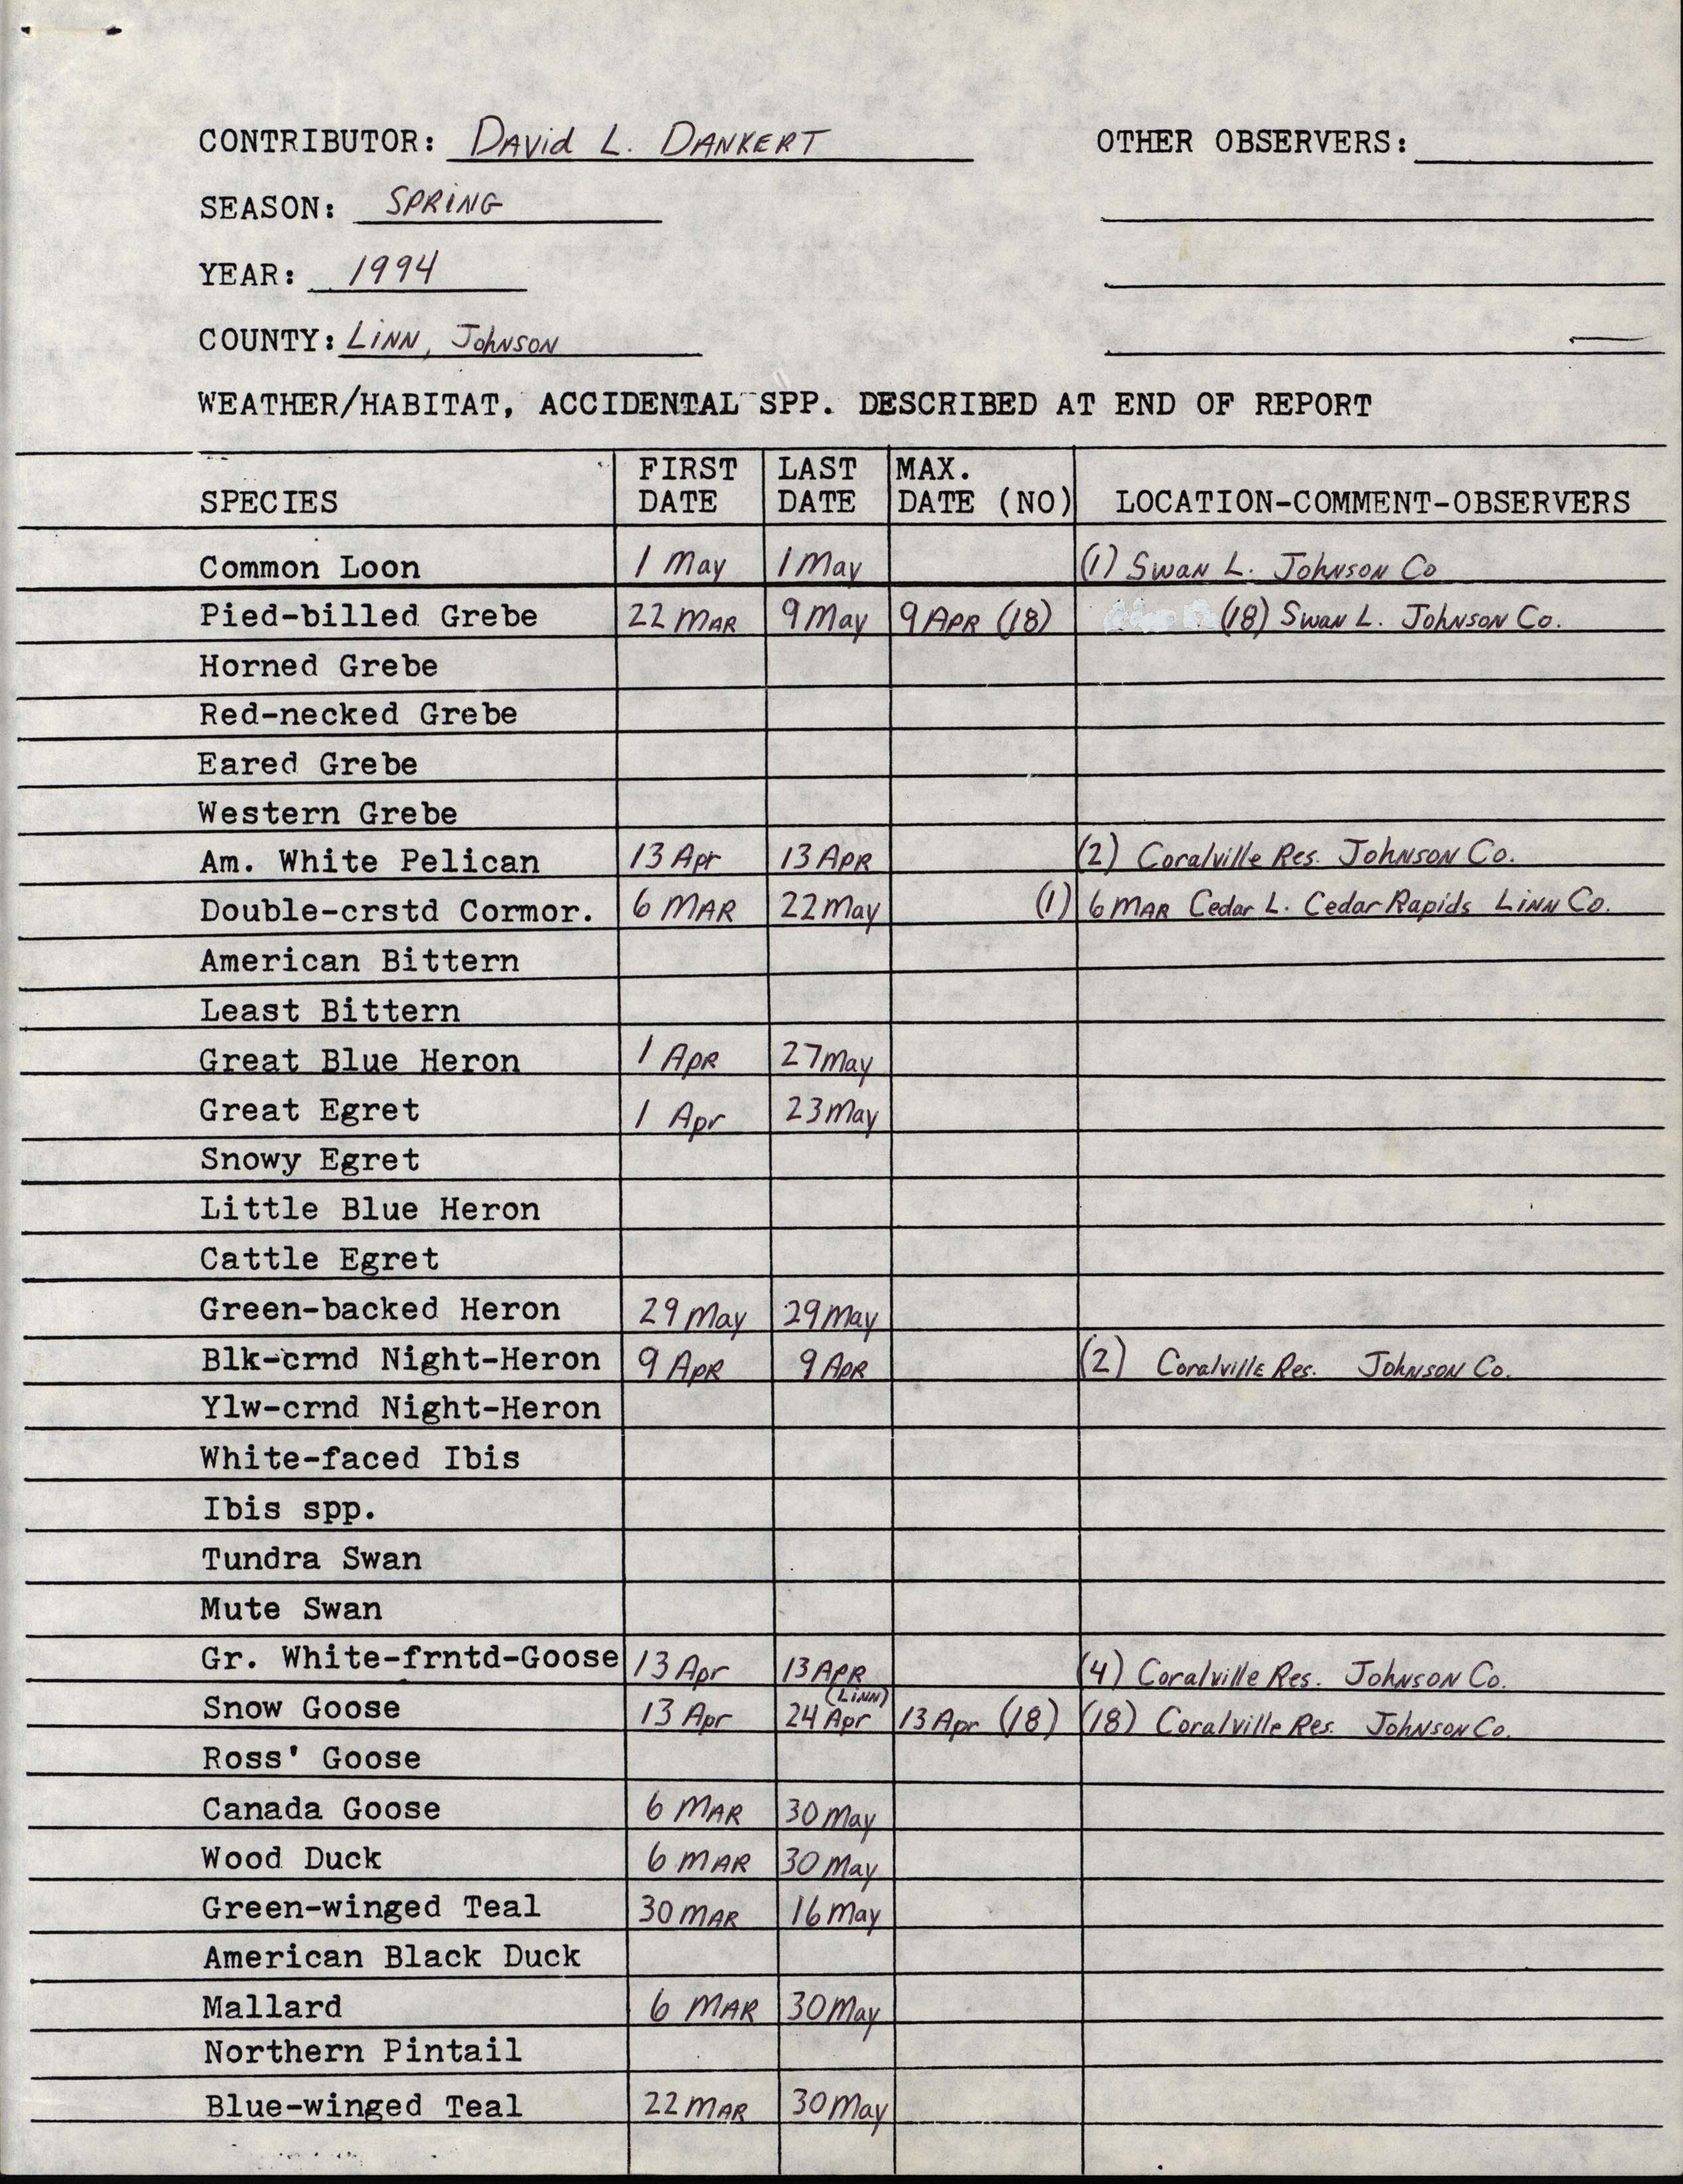 Annotated bird sighting list for Spring 1994 compiled by David Dankert